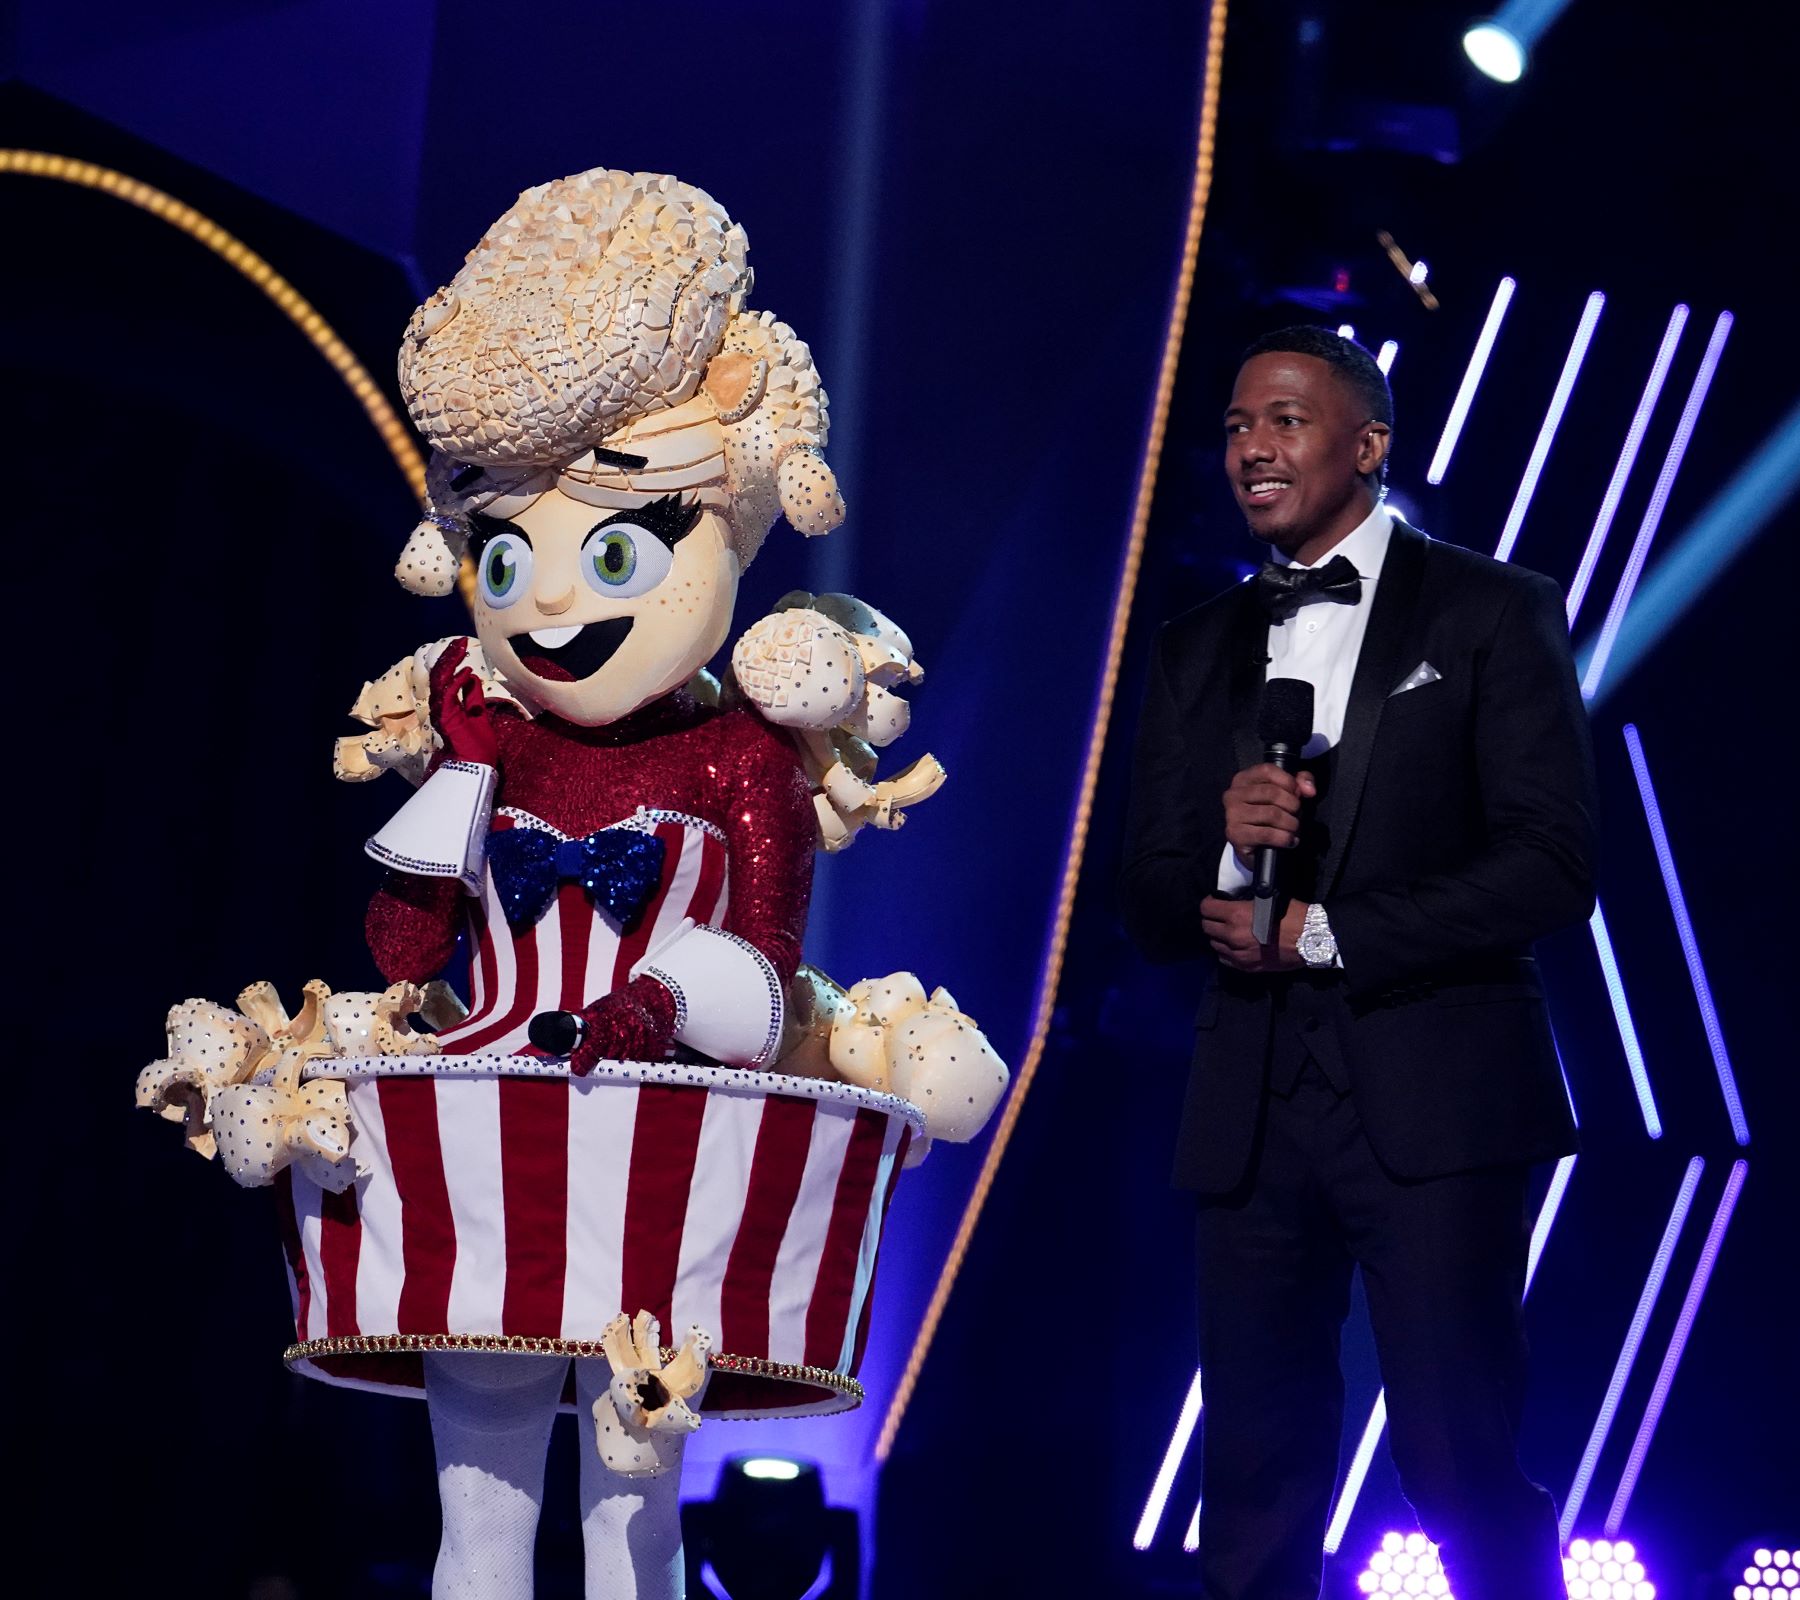 Nick Cannon and the Popcorn on 'The Masked Singer' Season 4